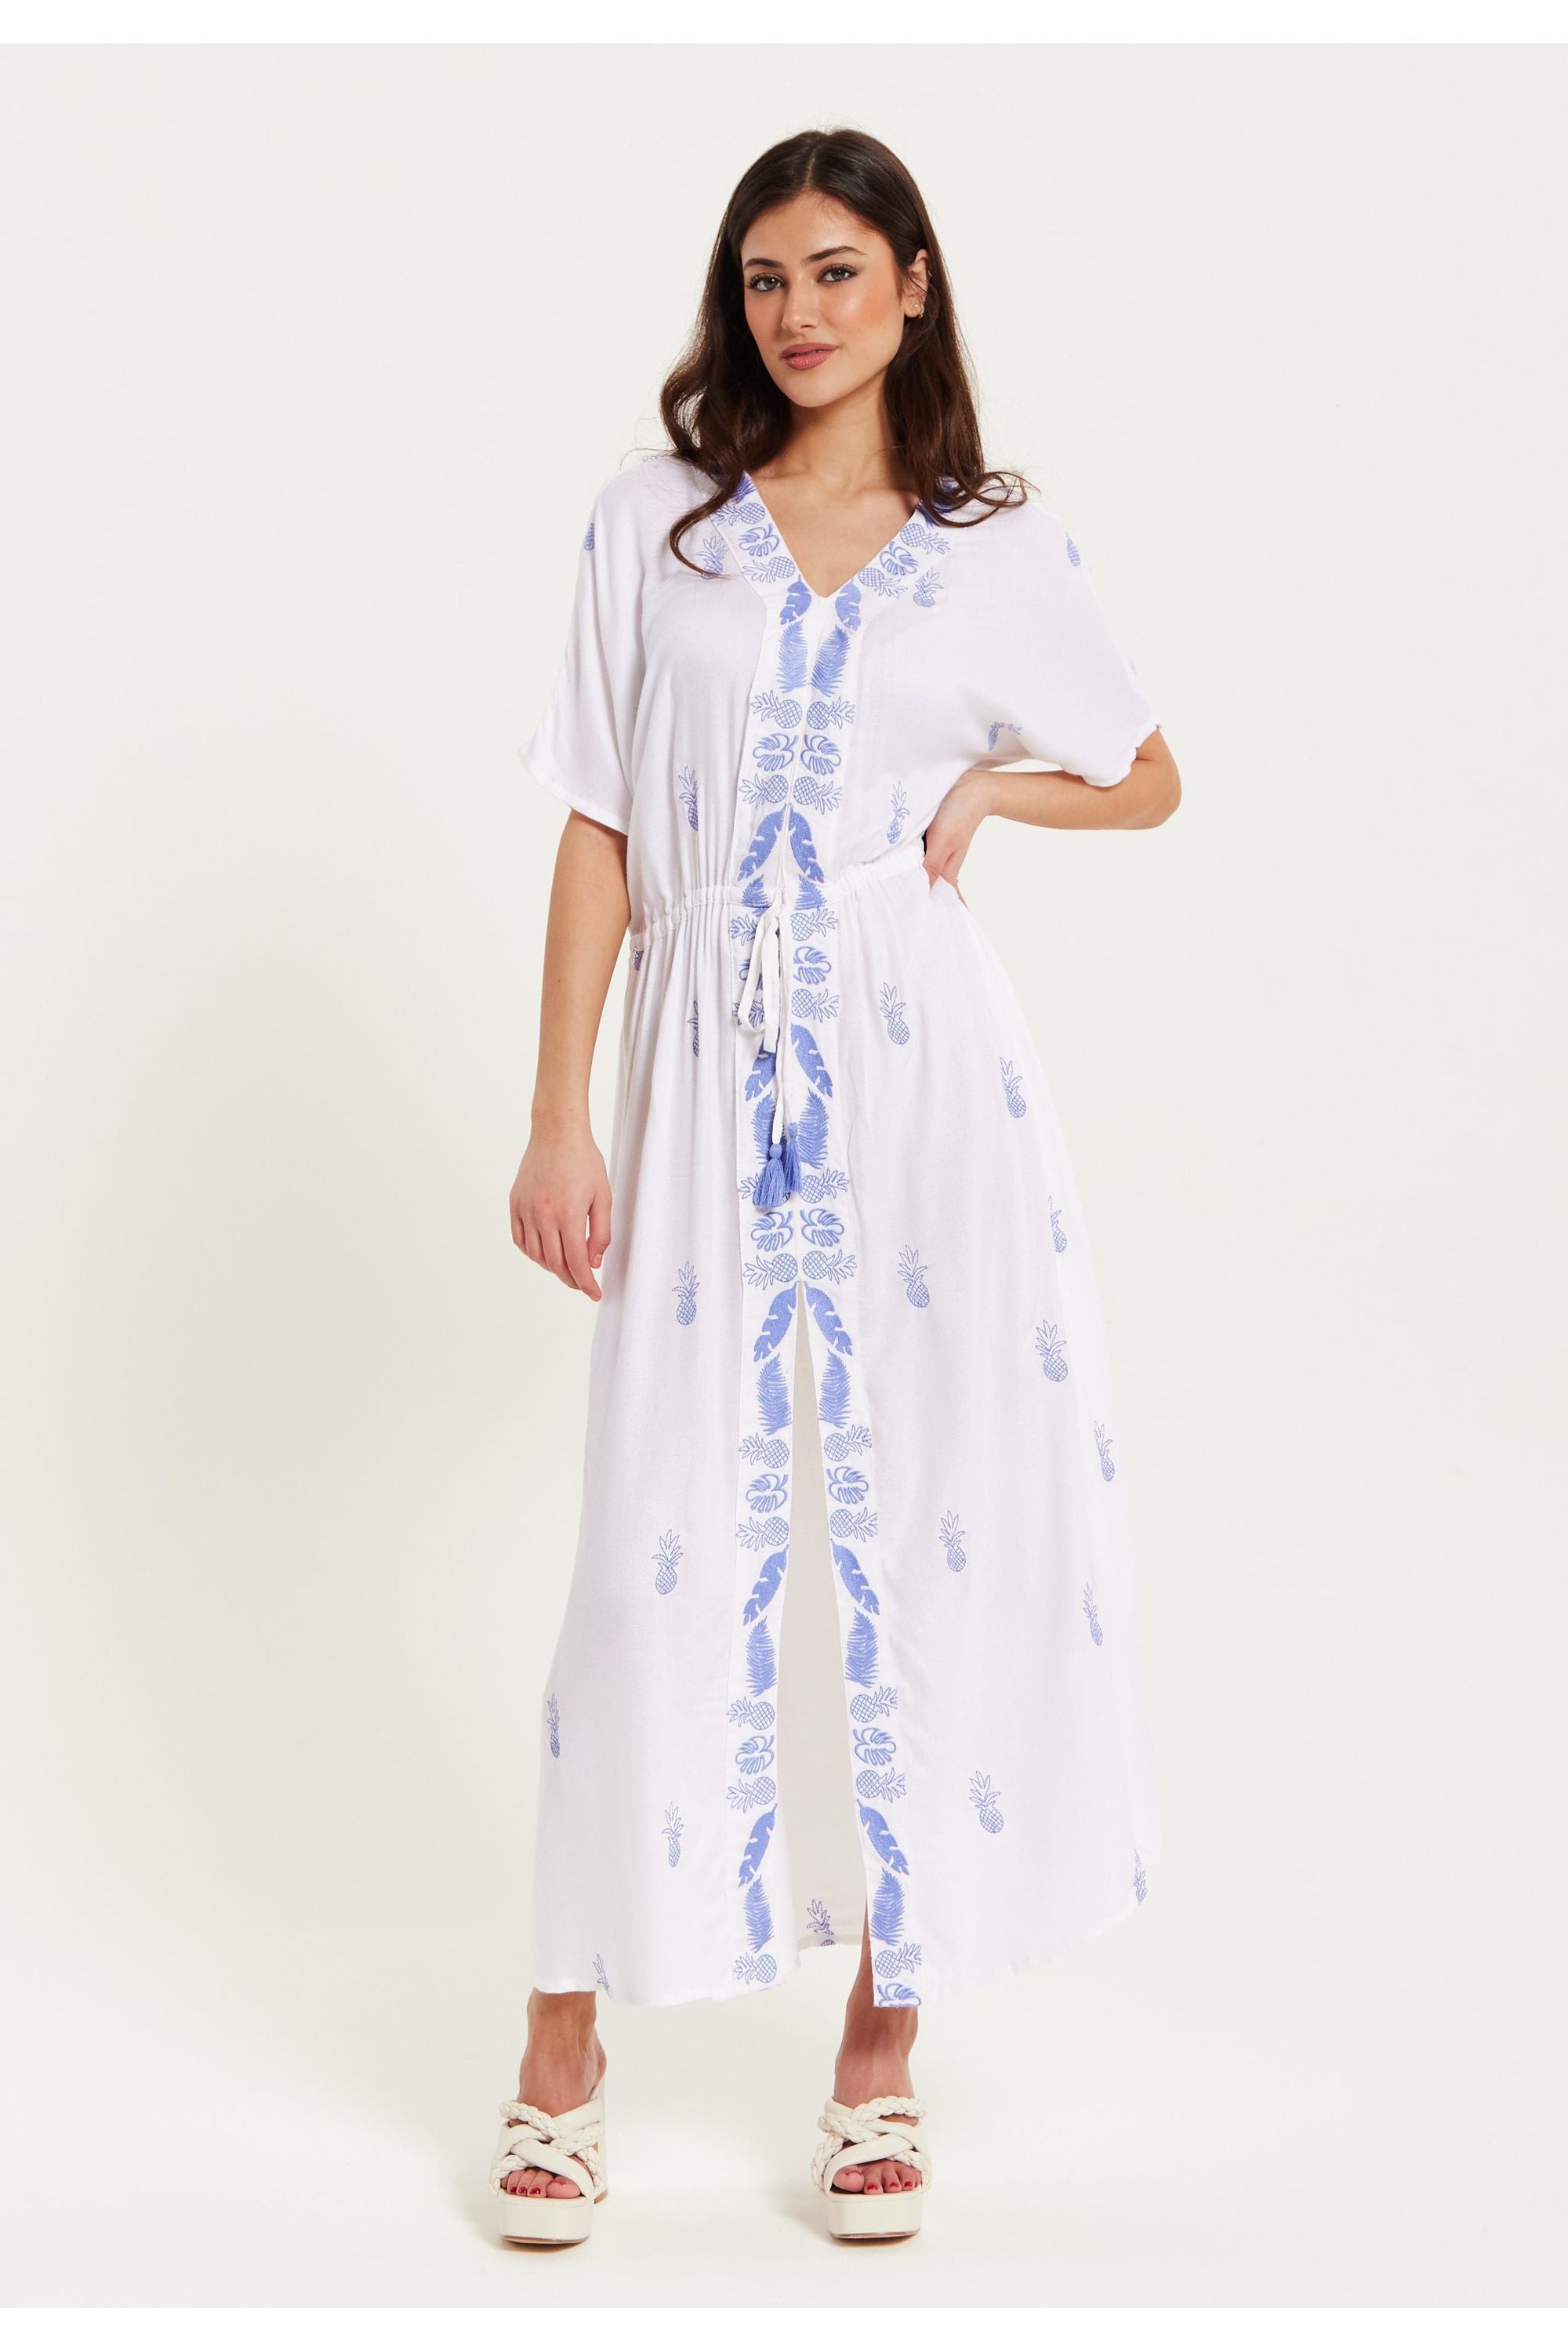 White Maxi Beach Dress With Blue Pineapple Embroidery A9-SNK21W001B